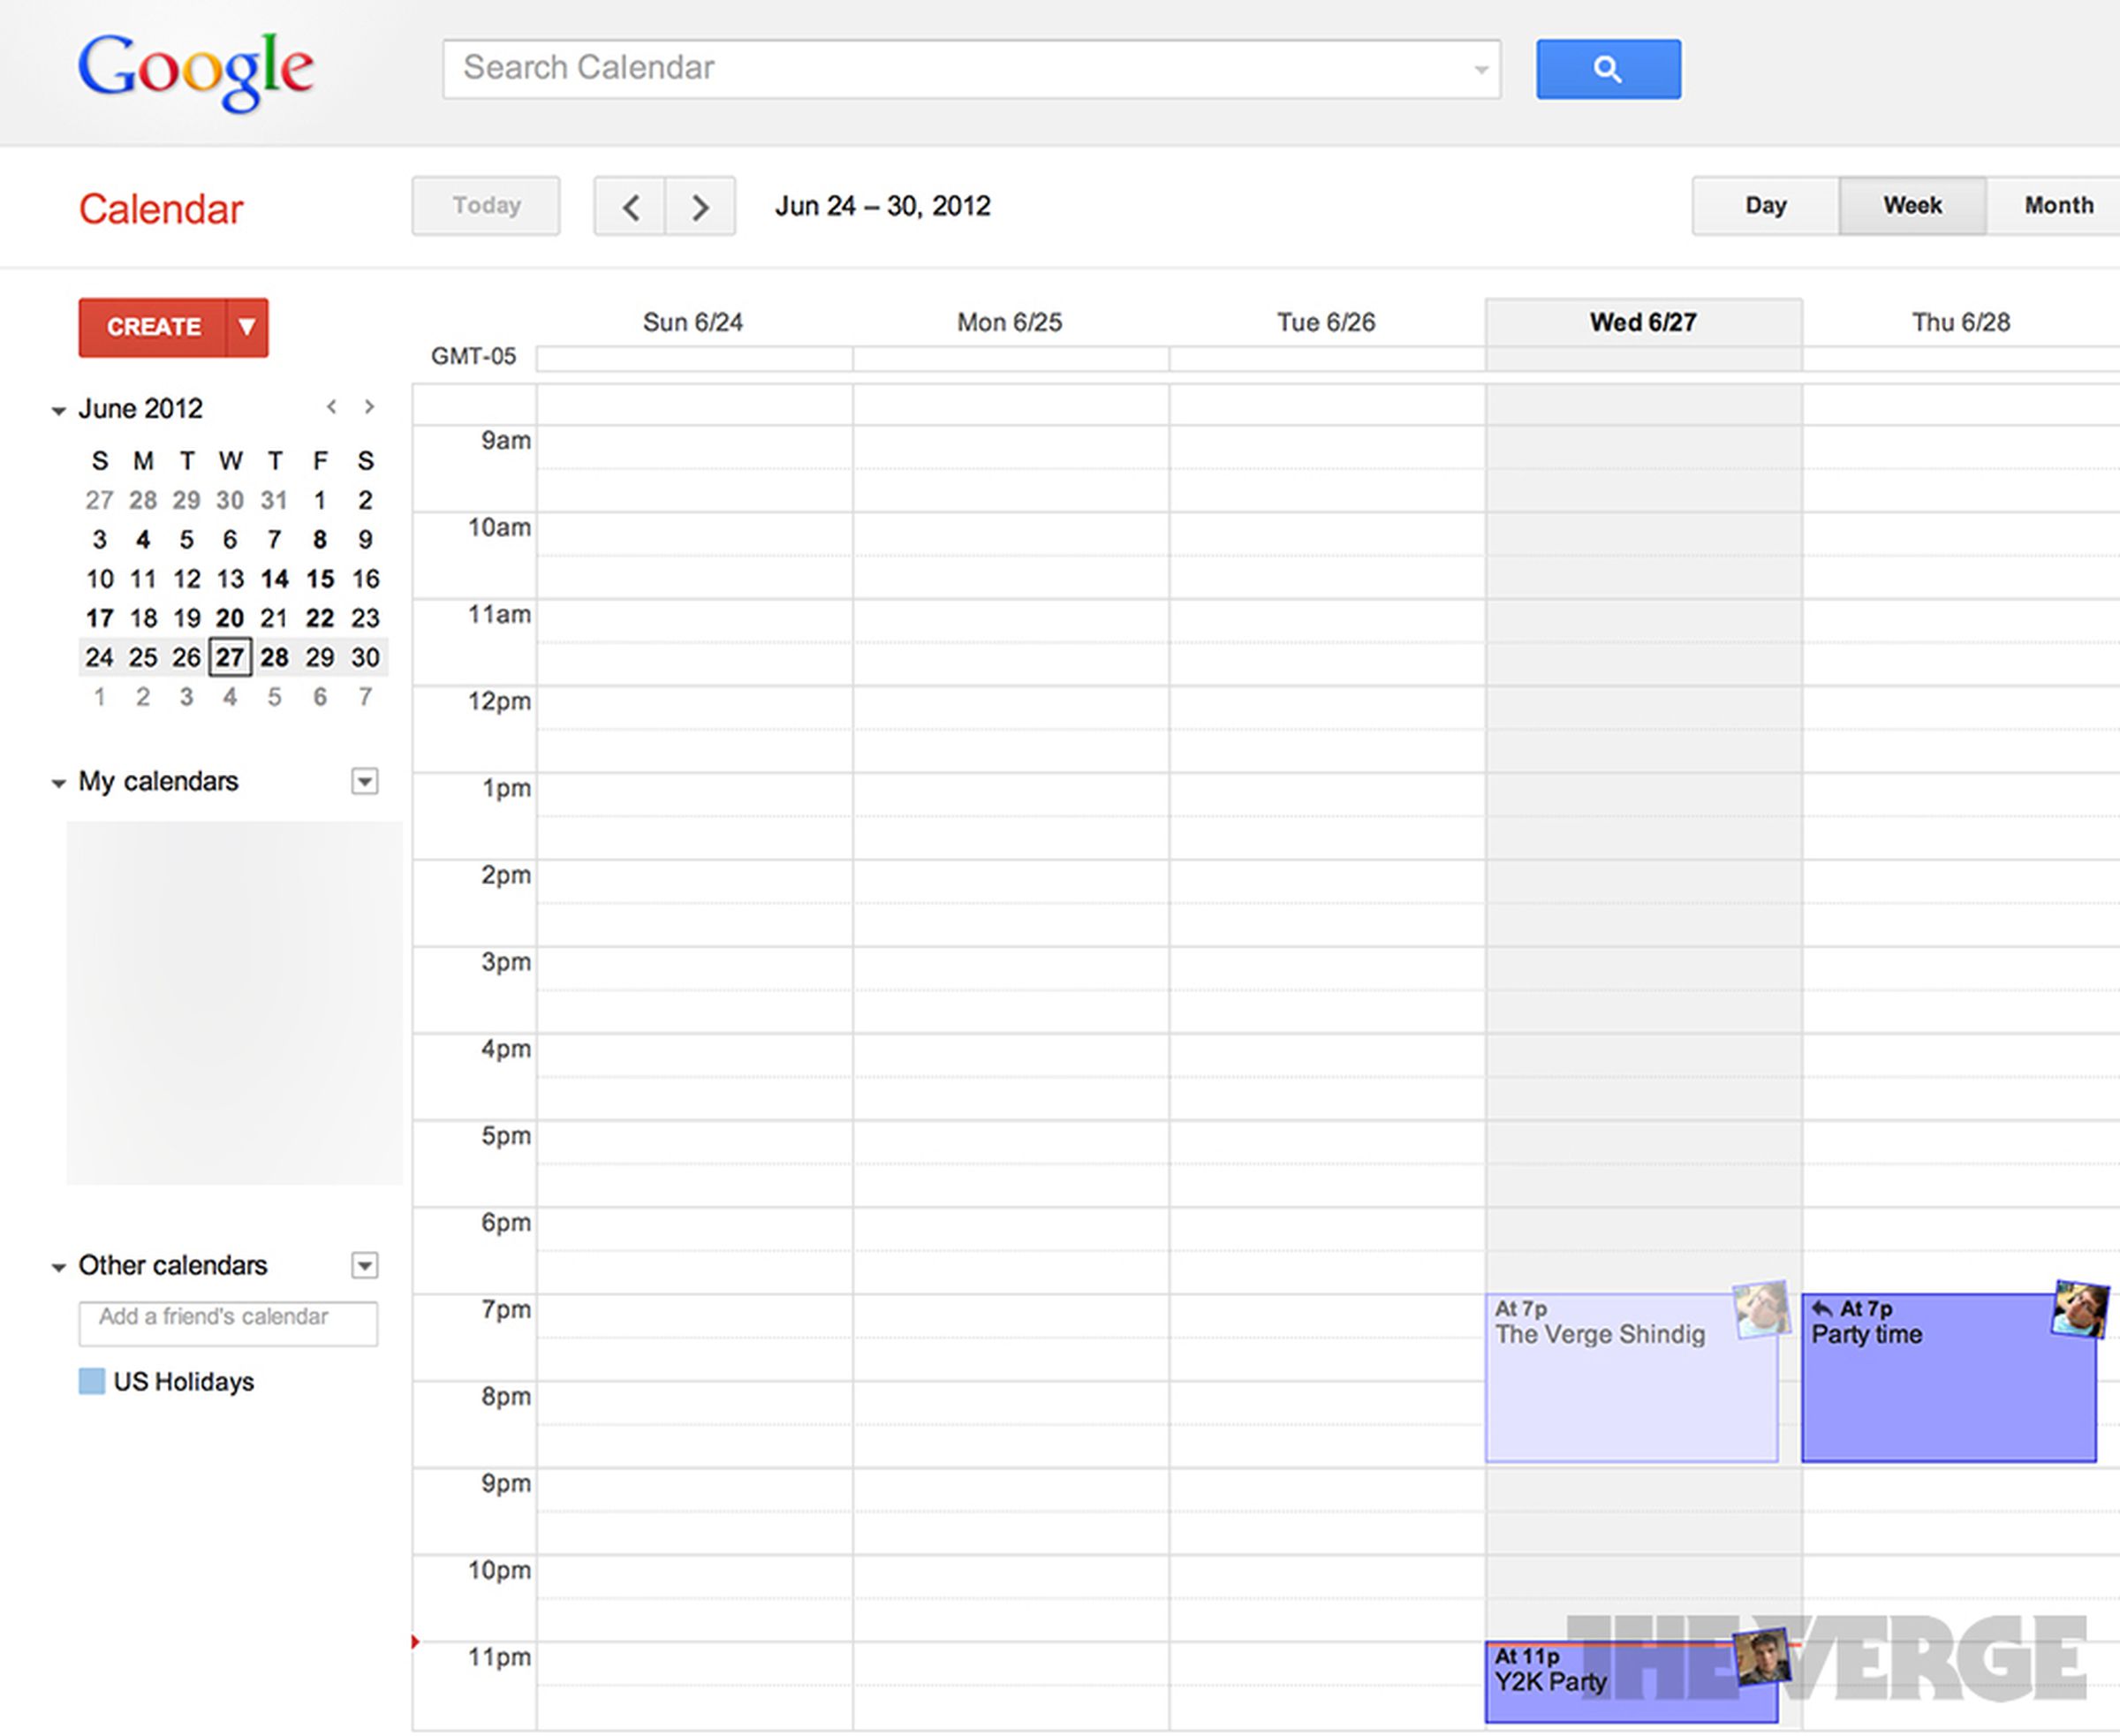 Google+ events and app updates hands-on pictures